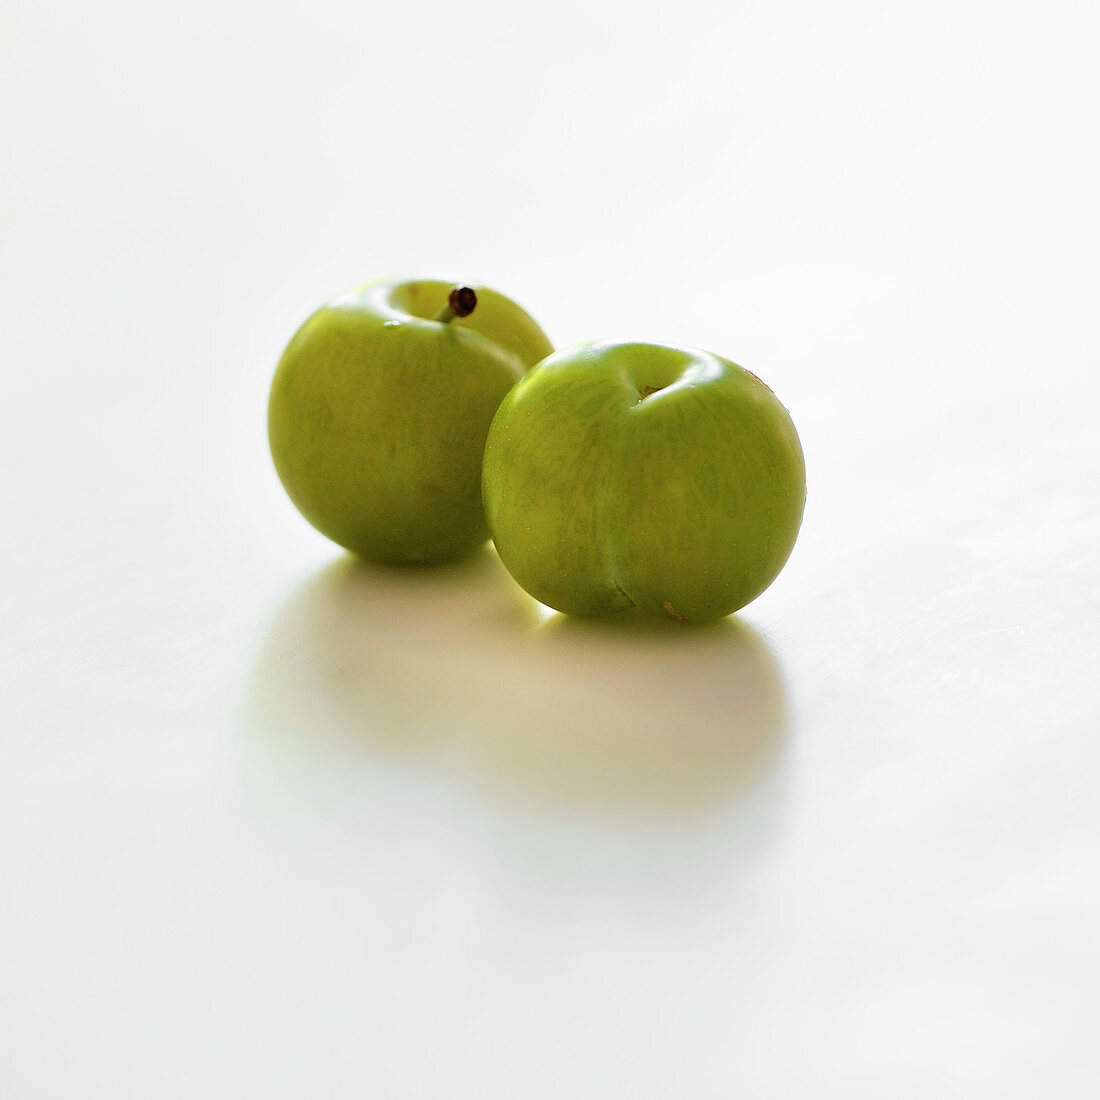 Greengages on a white background